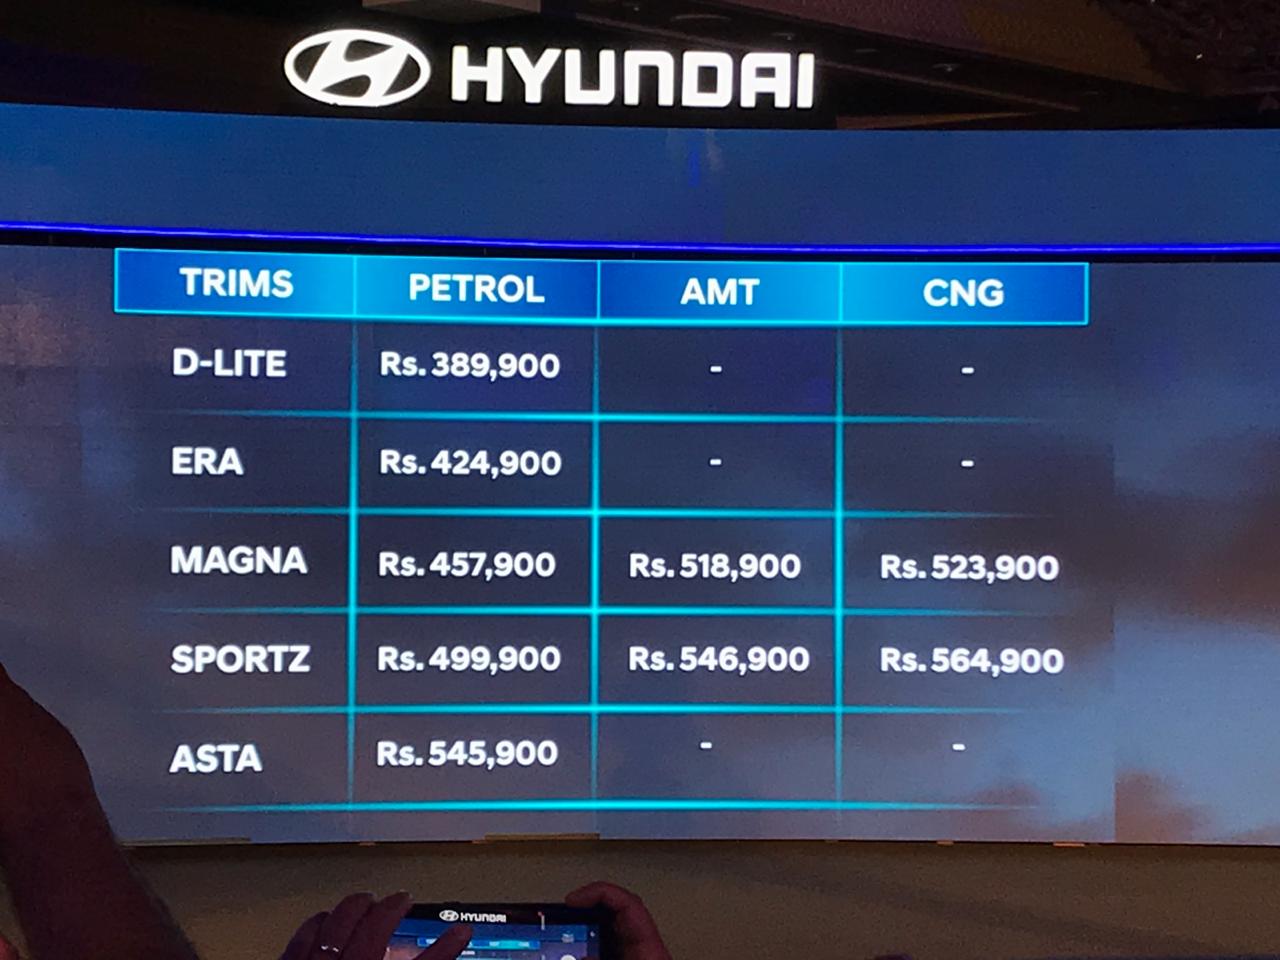 <p>Here&#39;s the full list of prices. These are introductory prices for the first 50,000 customers</p>

<p><strong>Petrol Manual</strong></p>

<p>D-lite - Rs 3.89 lakh</p>

<p>Era - Rs 4.25 lakh</p>

<p>Magna - Rs 4.58 lakh</p>

<p>Sportz - Rs 5.00 lakh</p>

<p>Asta - Rs 5.46 lakh</p>

<p>&nbsp;<br />
<strong>Petrol AMT</strong></p>

<p>Magna - Rs 5.19 lakh</p>

<p>Sportz - Rs 5.48 lakh</p>



<p><strong>CNG</strong></p>

<p>Magna - Rs 5.24 lakh</p>

<p>Sportz - Rs 5.65 lakh</p>